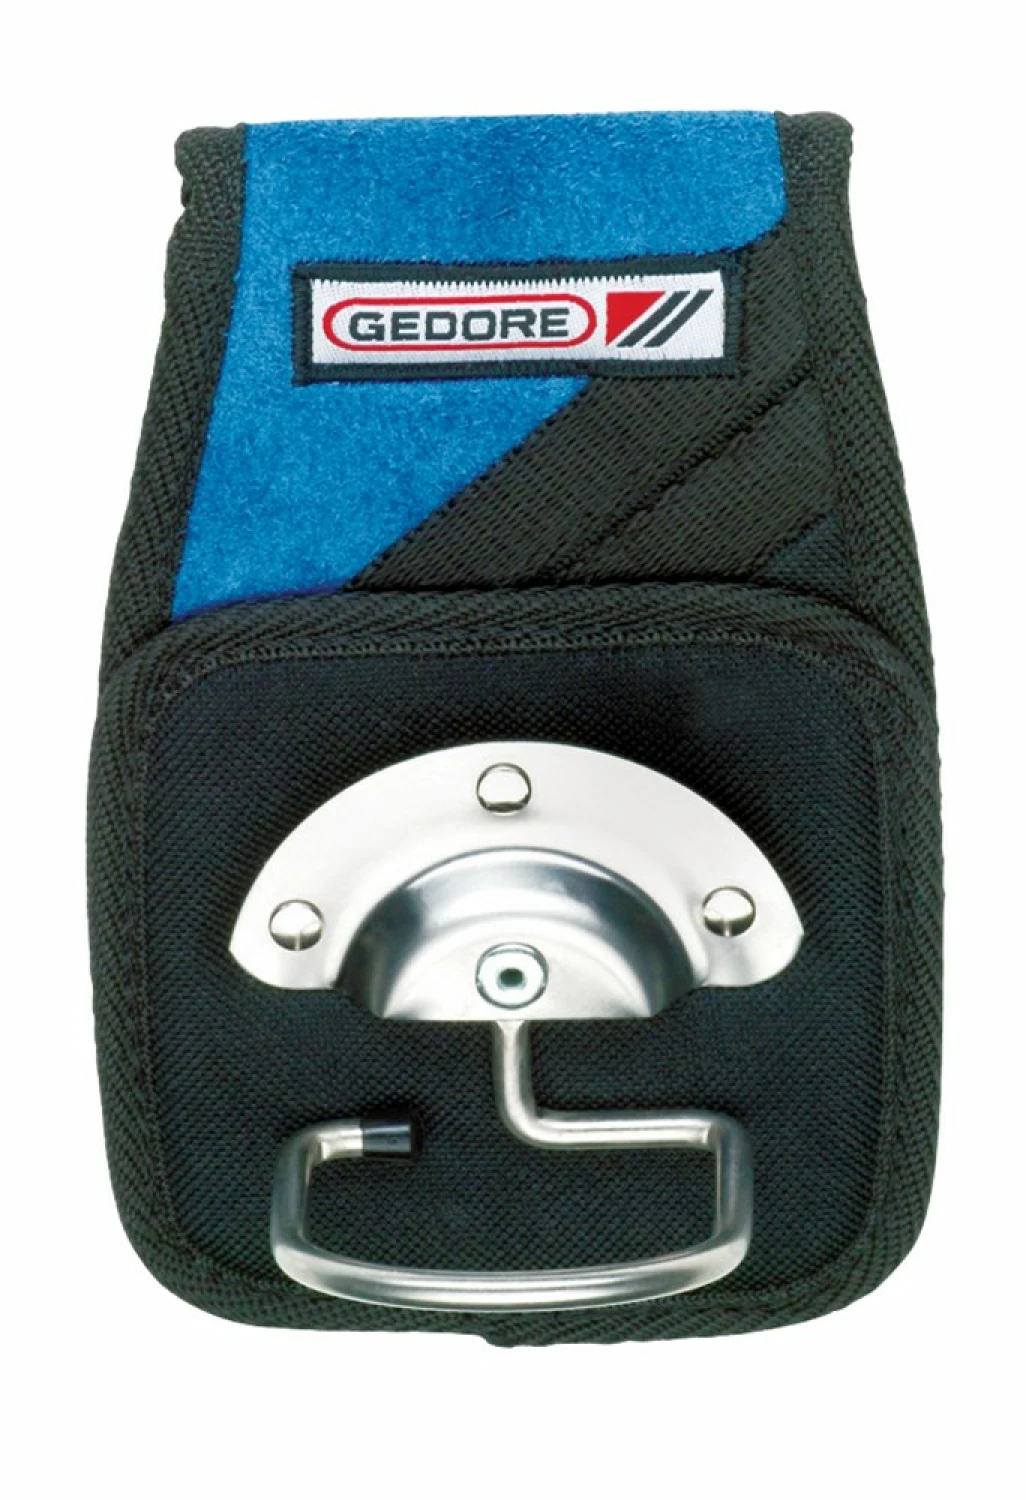 Gedore WT 1056 4 Porte-outils